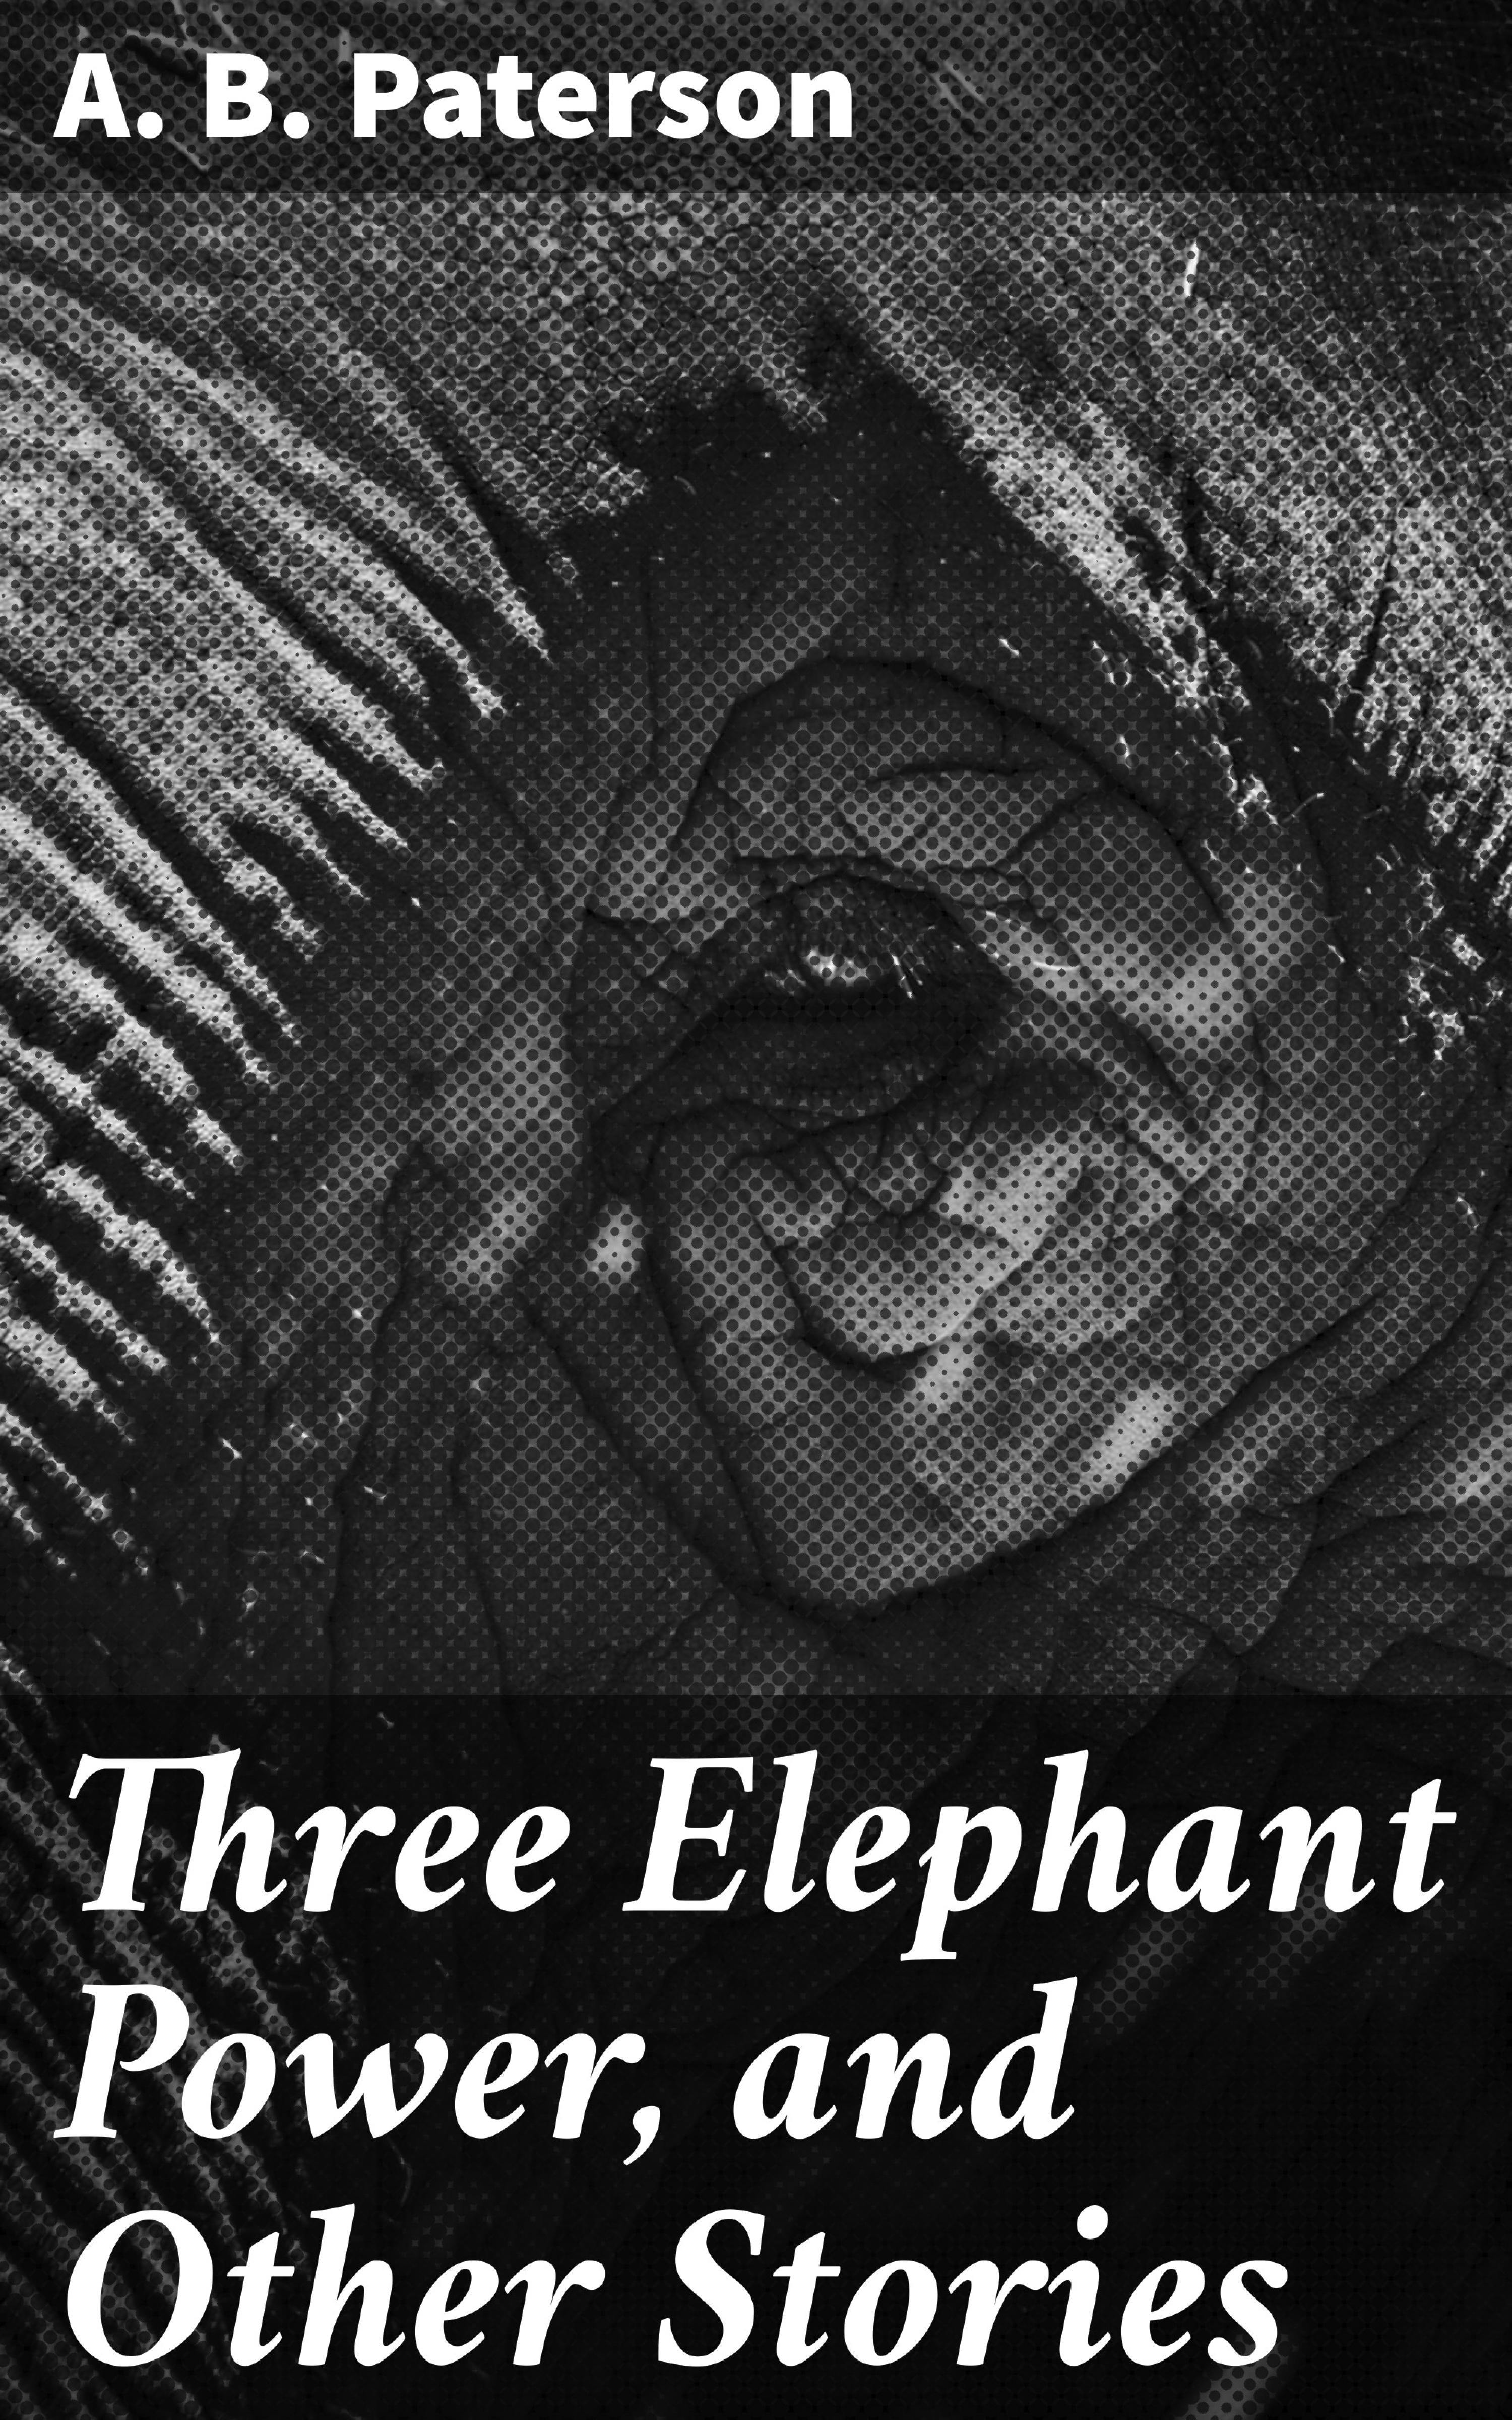 Three Elephant Power, and Other Stories - undefined